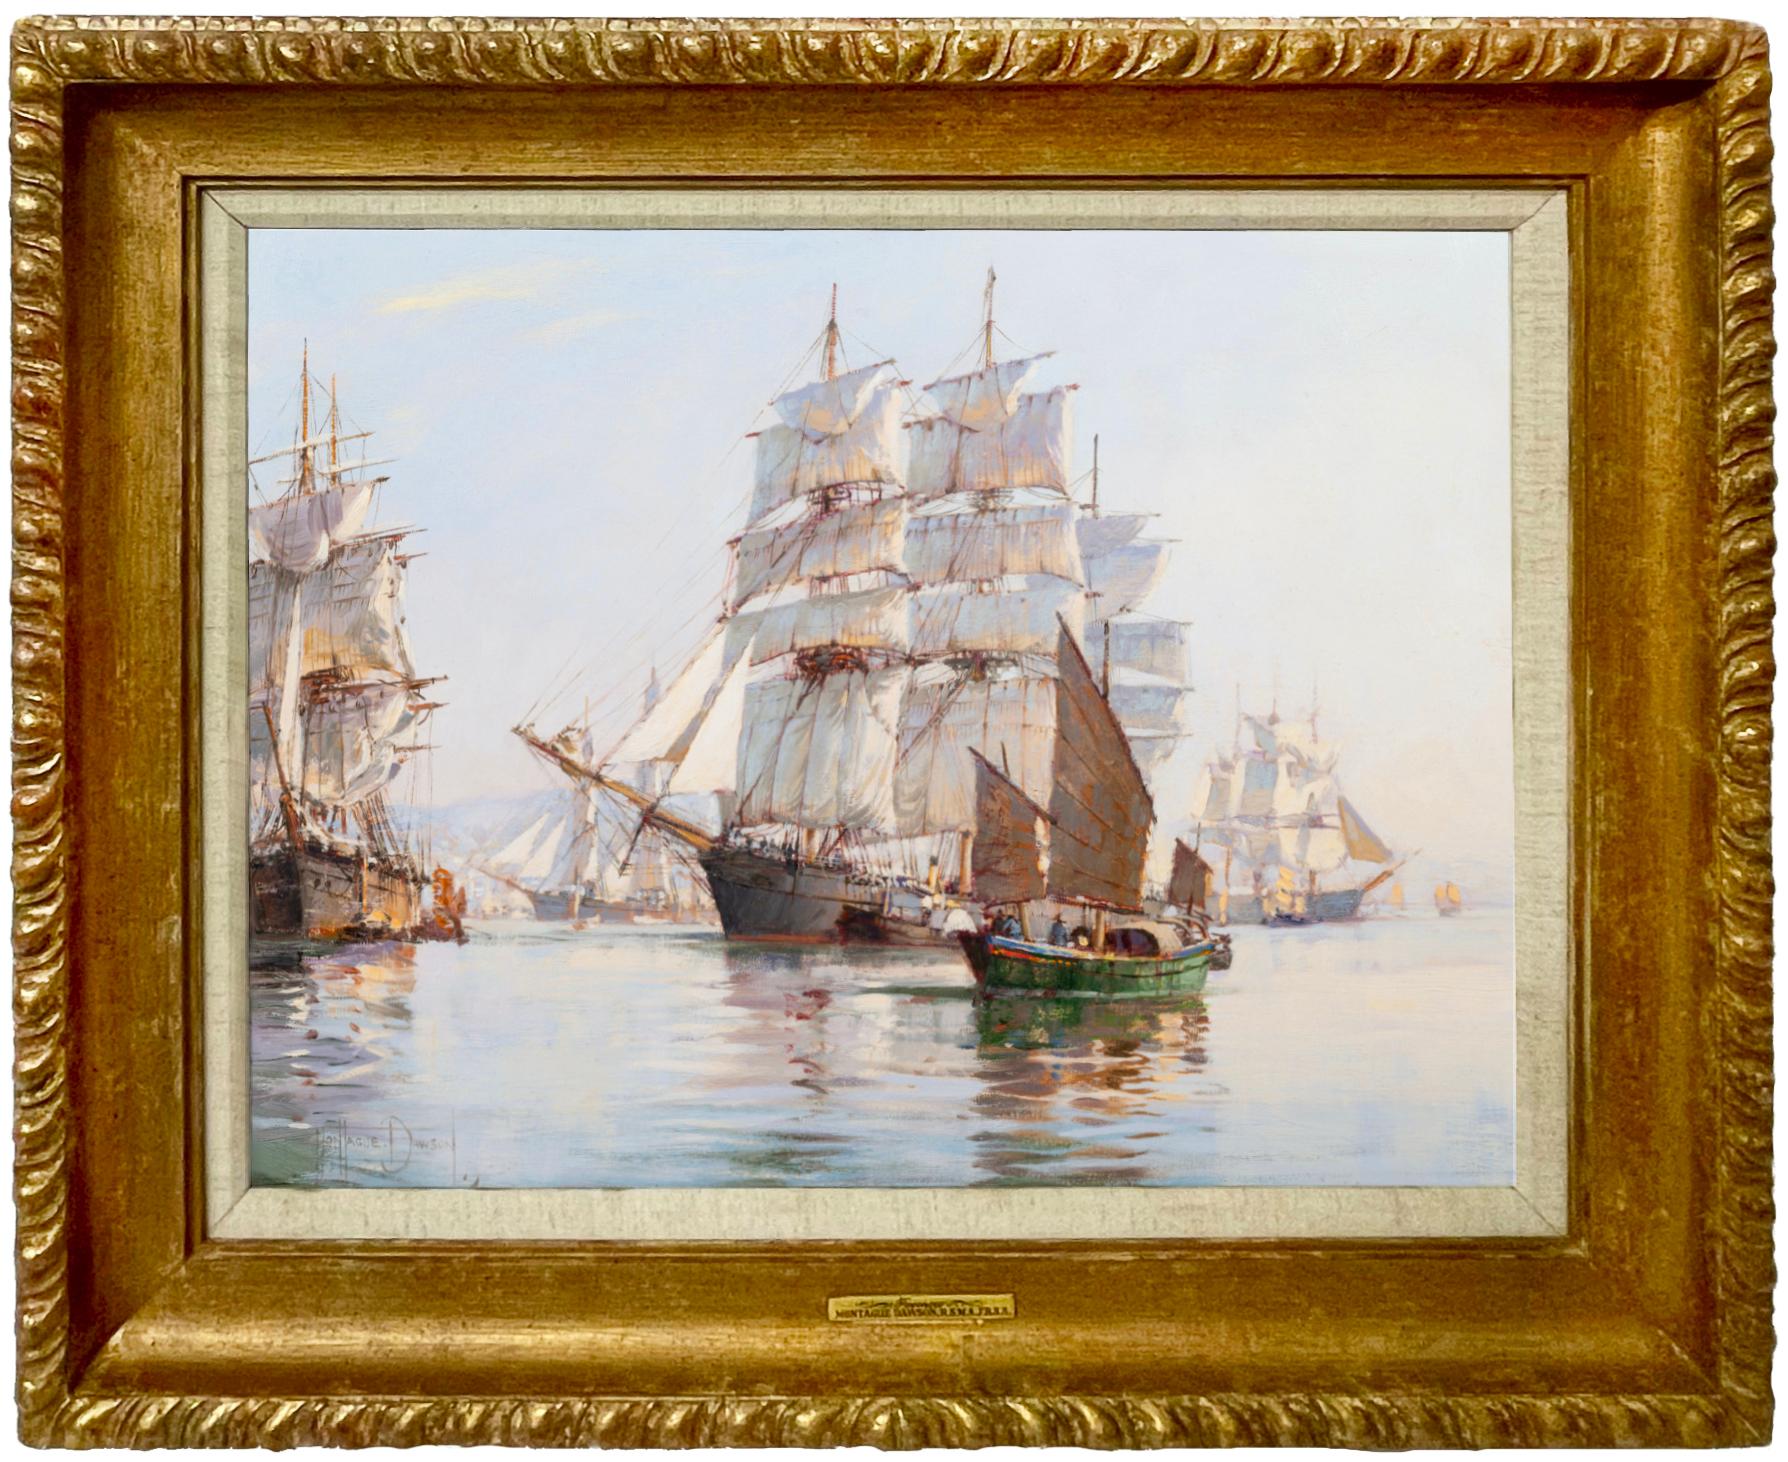 Montague Dawson Landscape Painting - The China Clippers - 'Foochow'